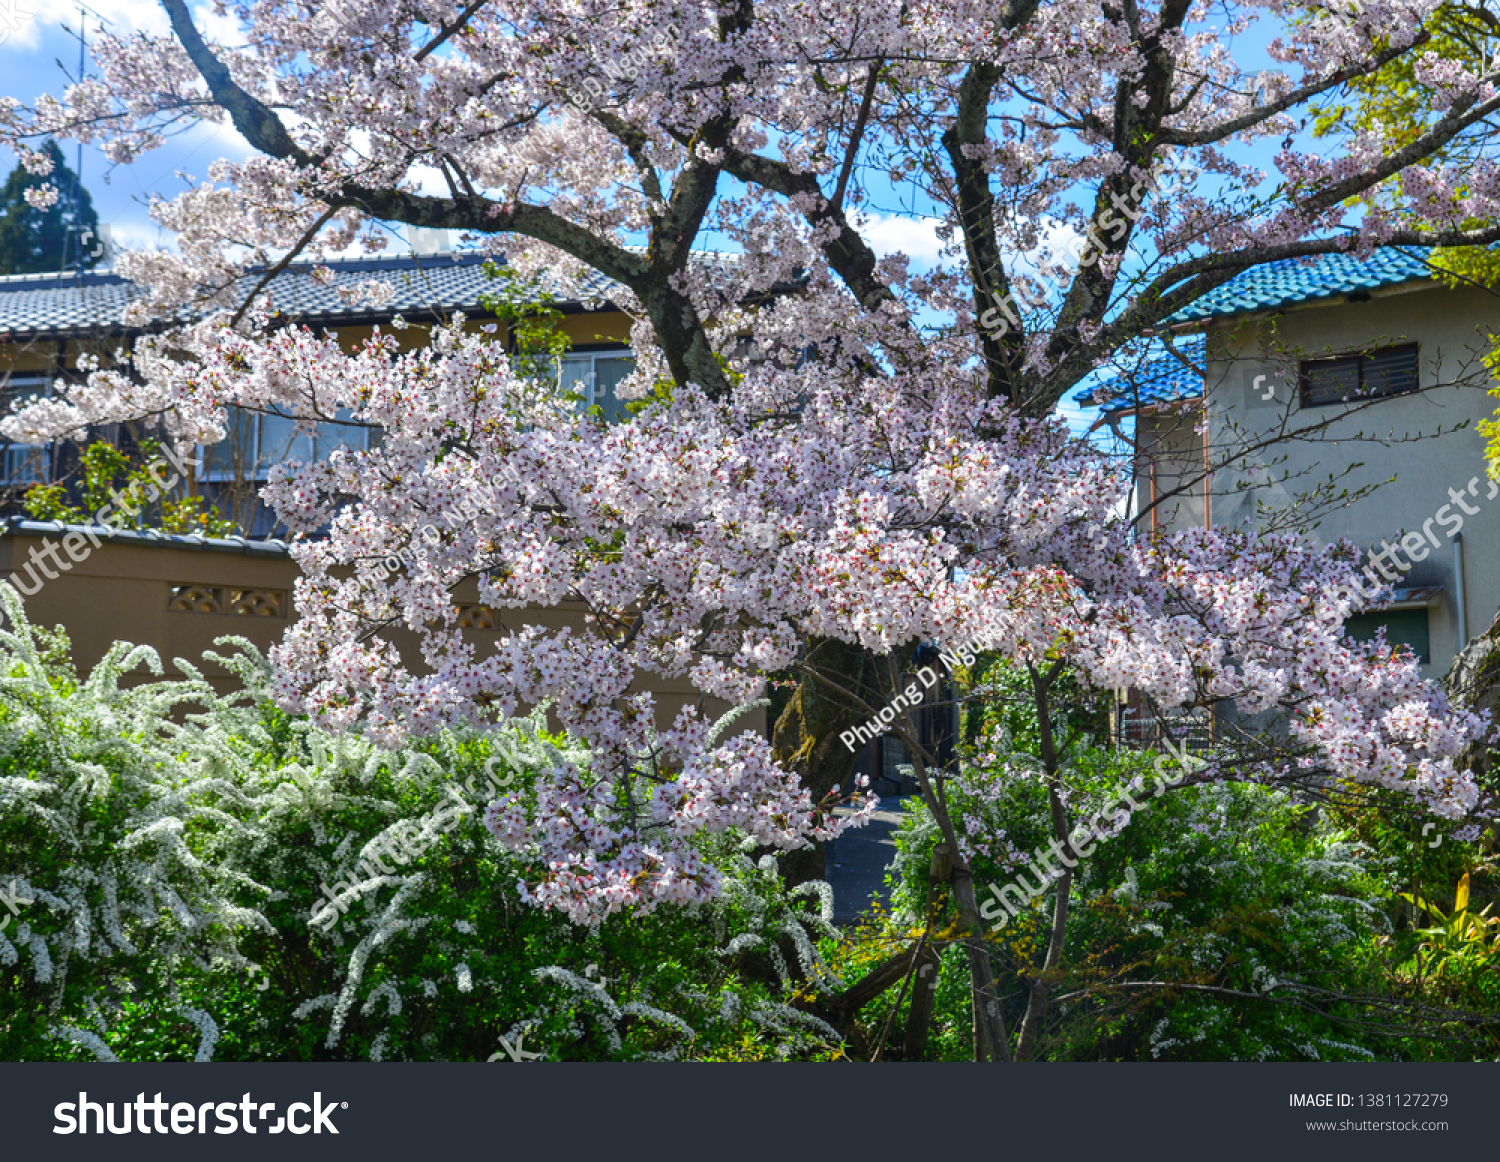 Cherry trees with flowers in Kyoto, Japan. Cherry blossom (sakura) will start blooming around the late March in Japan. #1381127279